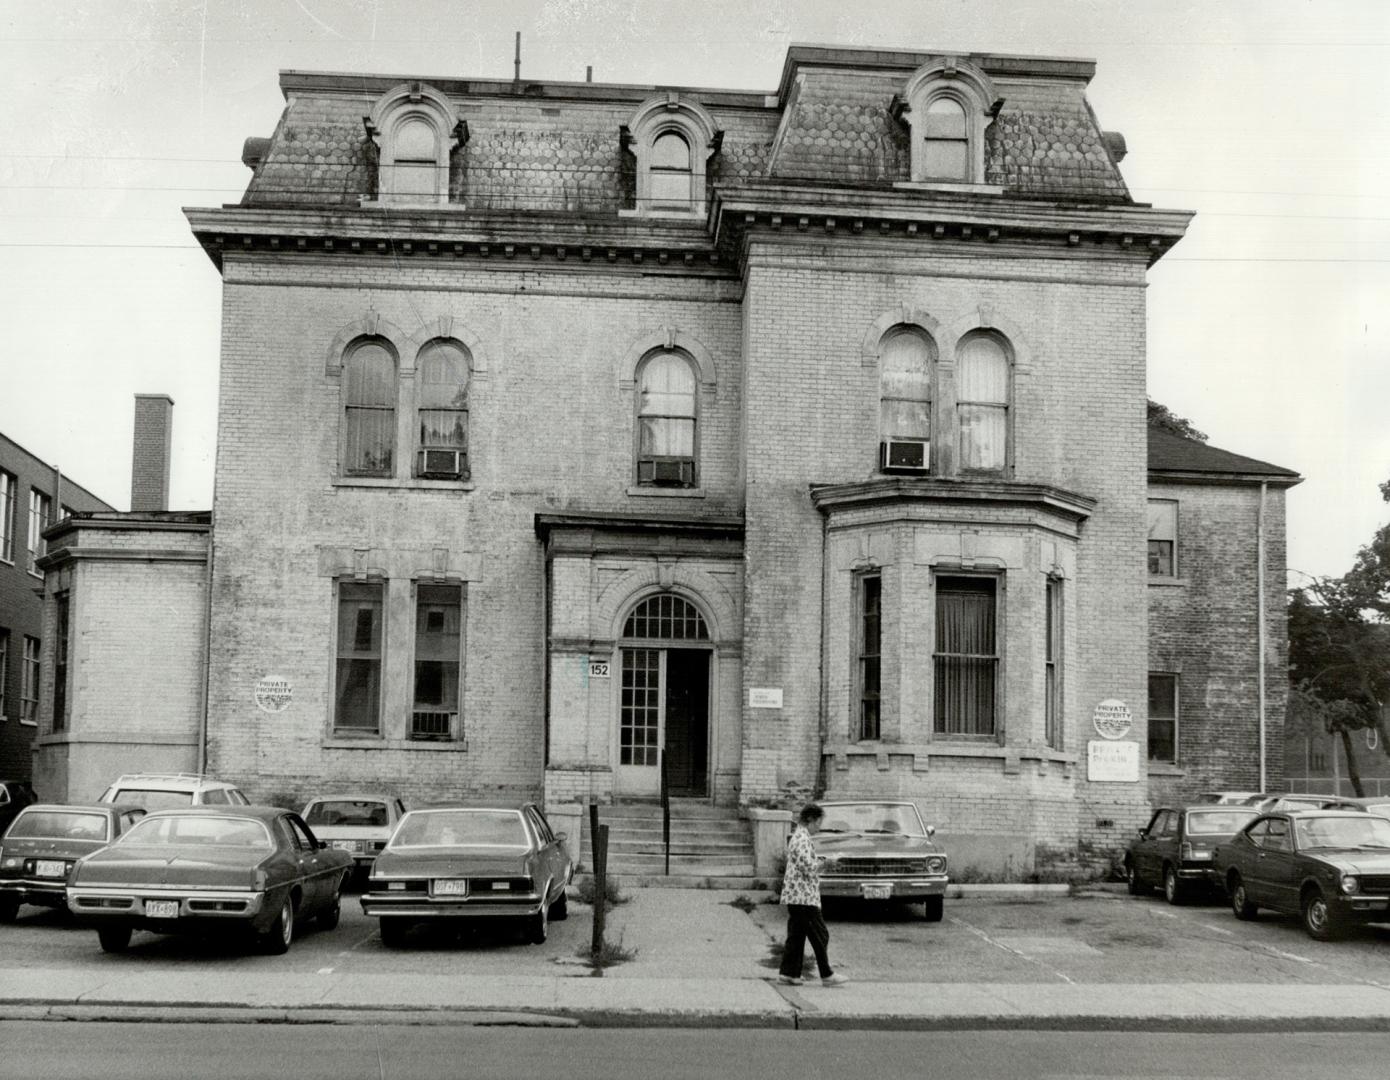 In its heyday, 152 Beverley St